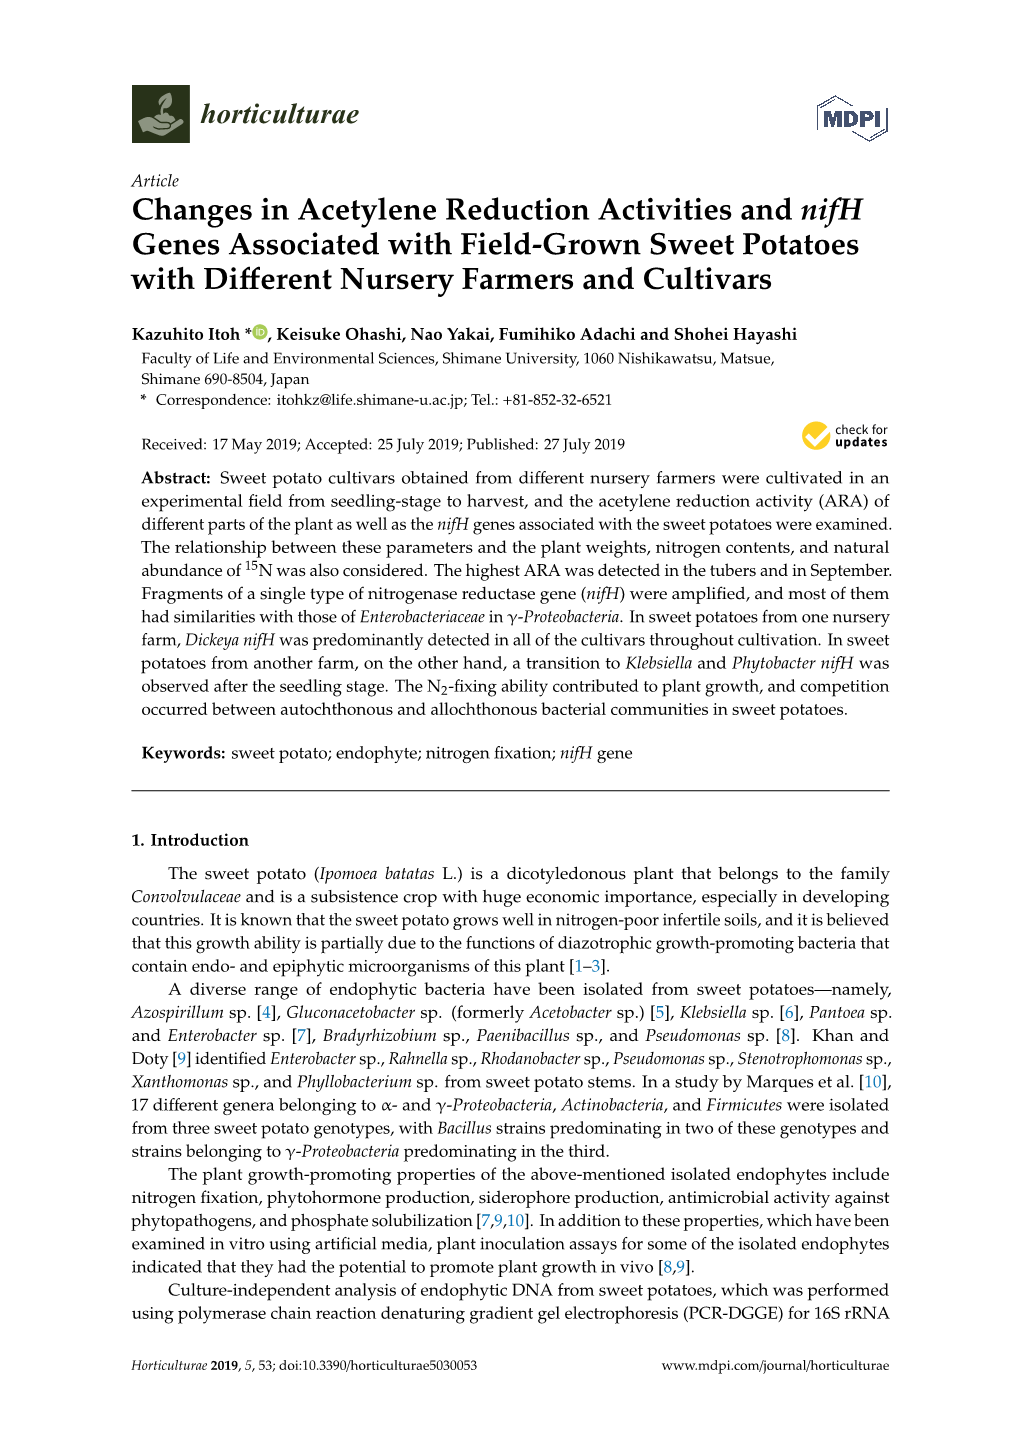 Changes in Acetylene Reduction Activities and Nifh Genes Associated with Field-Grown Sweet Potatoes with Diﬀerent Nursery Farmers and Cultivars